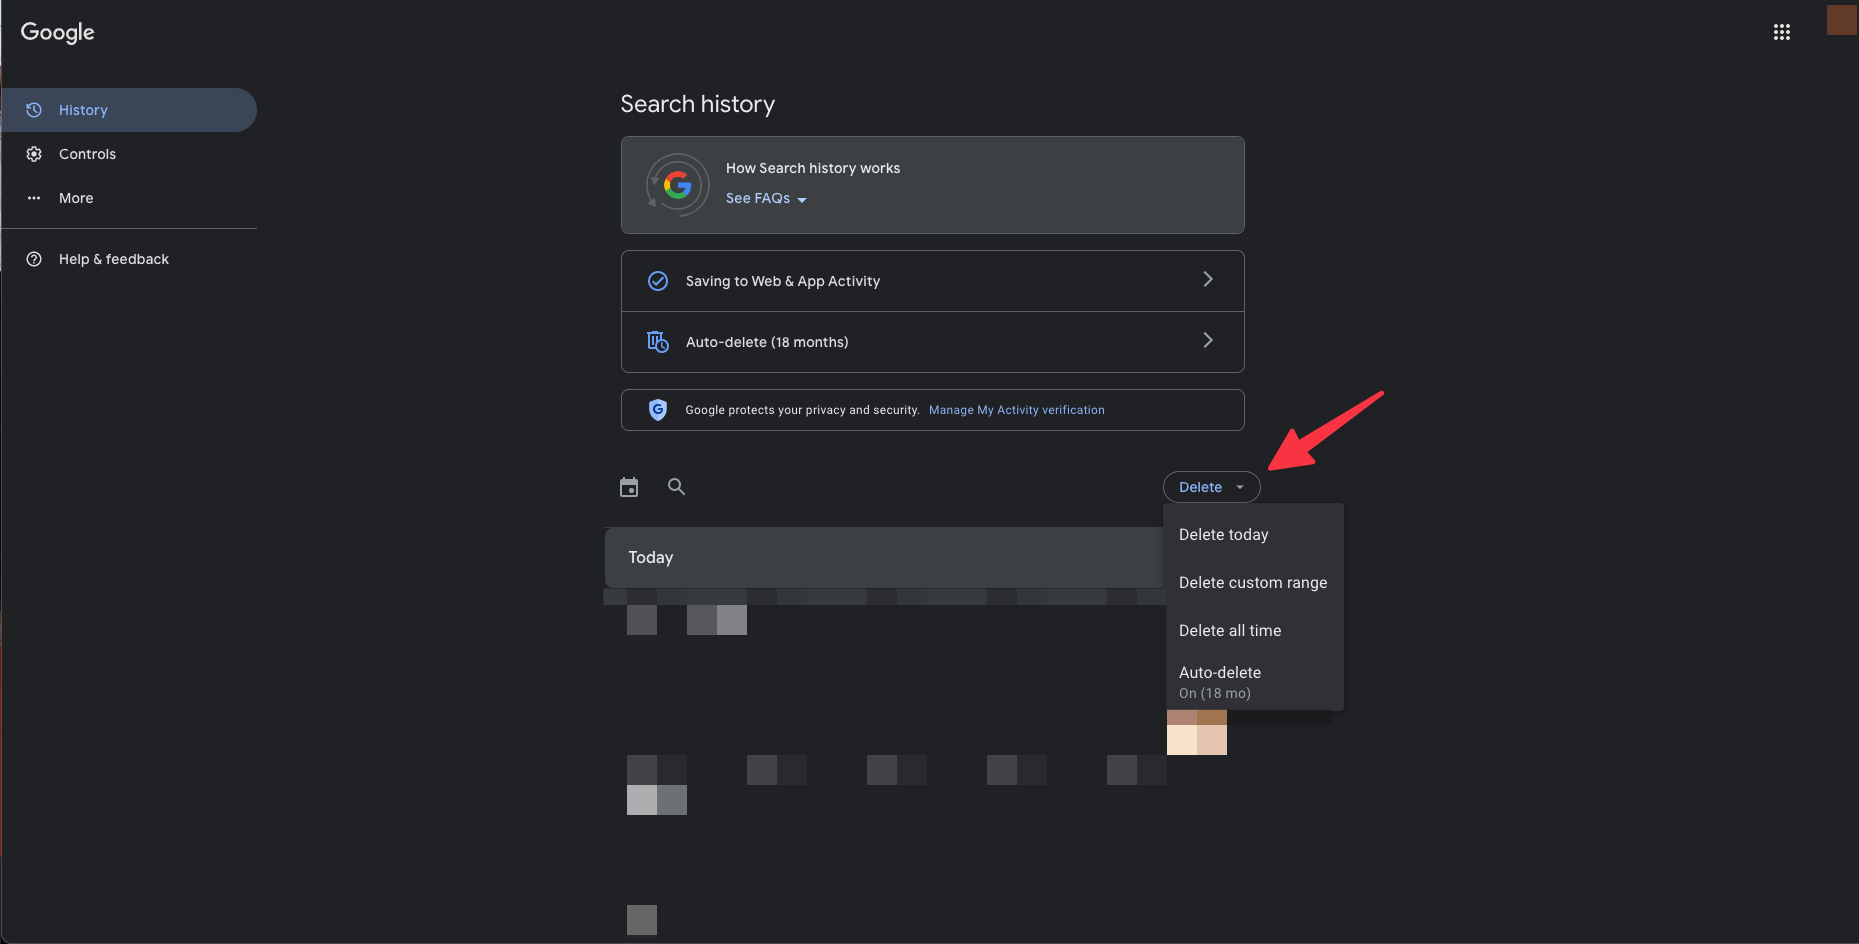 Remote.tools shows how to clear Google search history from your Google Account. Tap on Delete drop down to delete upto 18 months of search history from your Google Account